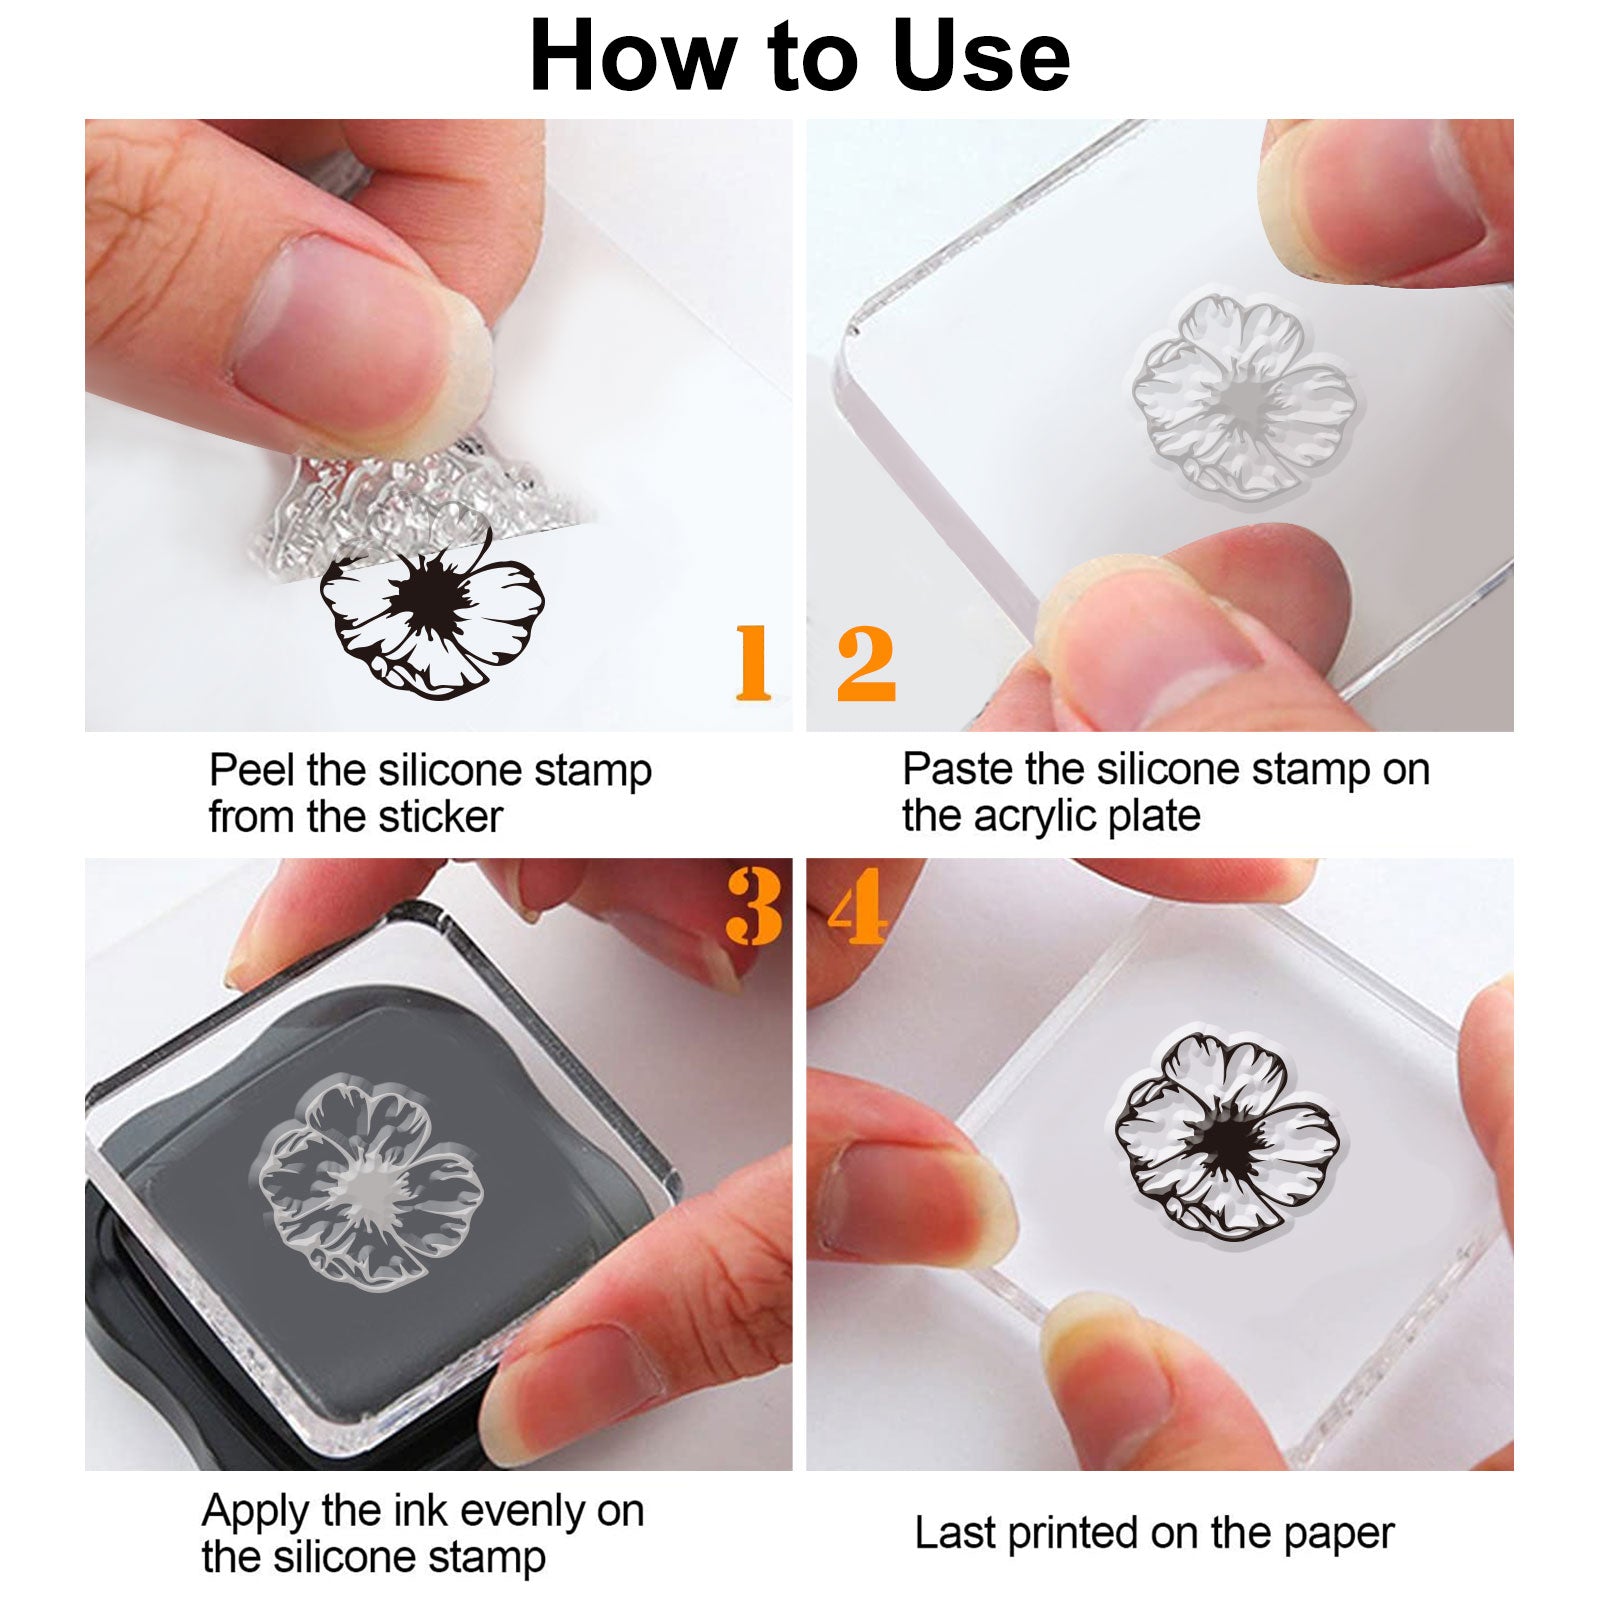 GLOBLELAND Flower Wreath Clear Stamps Silicone Stamp Cards Blessing Words Clear Stamps for Card Making Decoration and DIY Scrapbooking